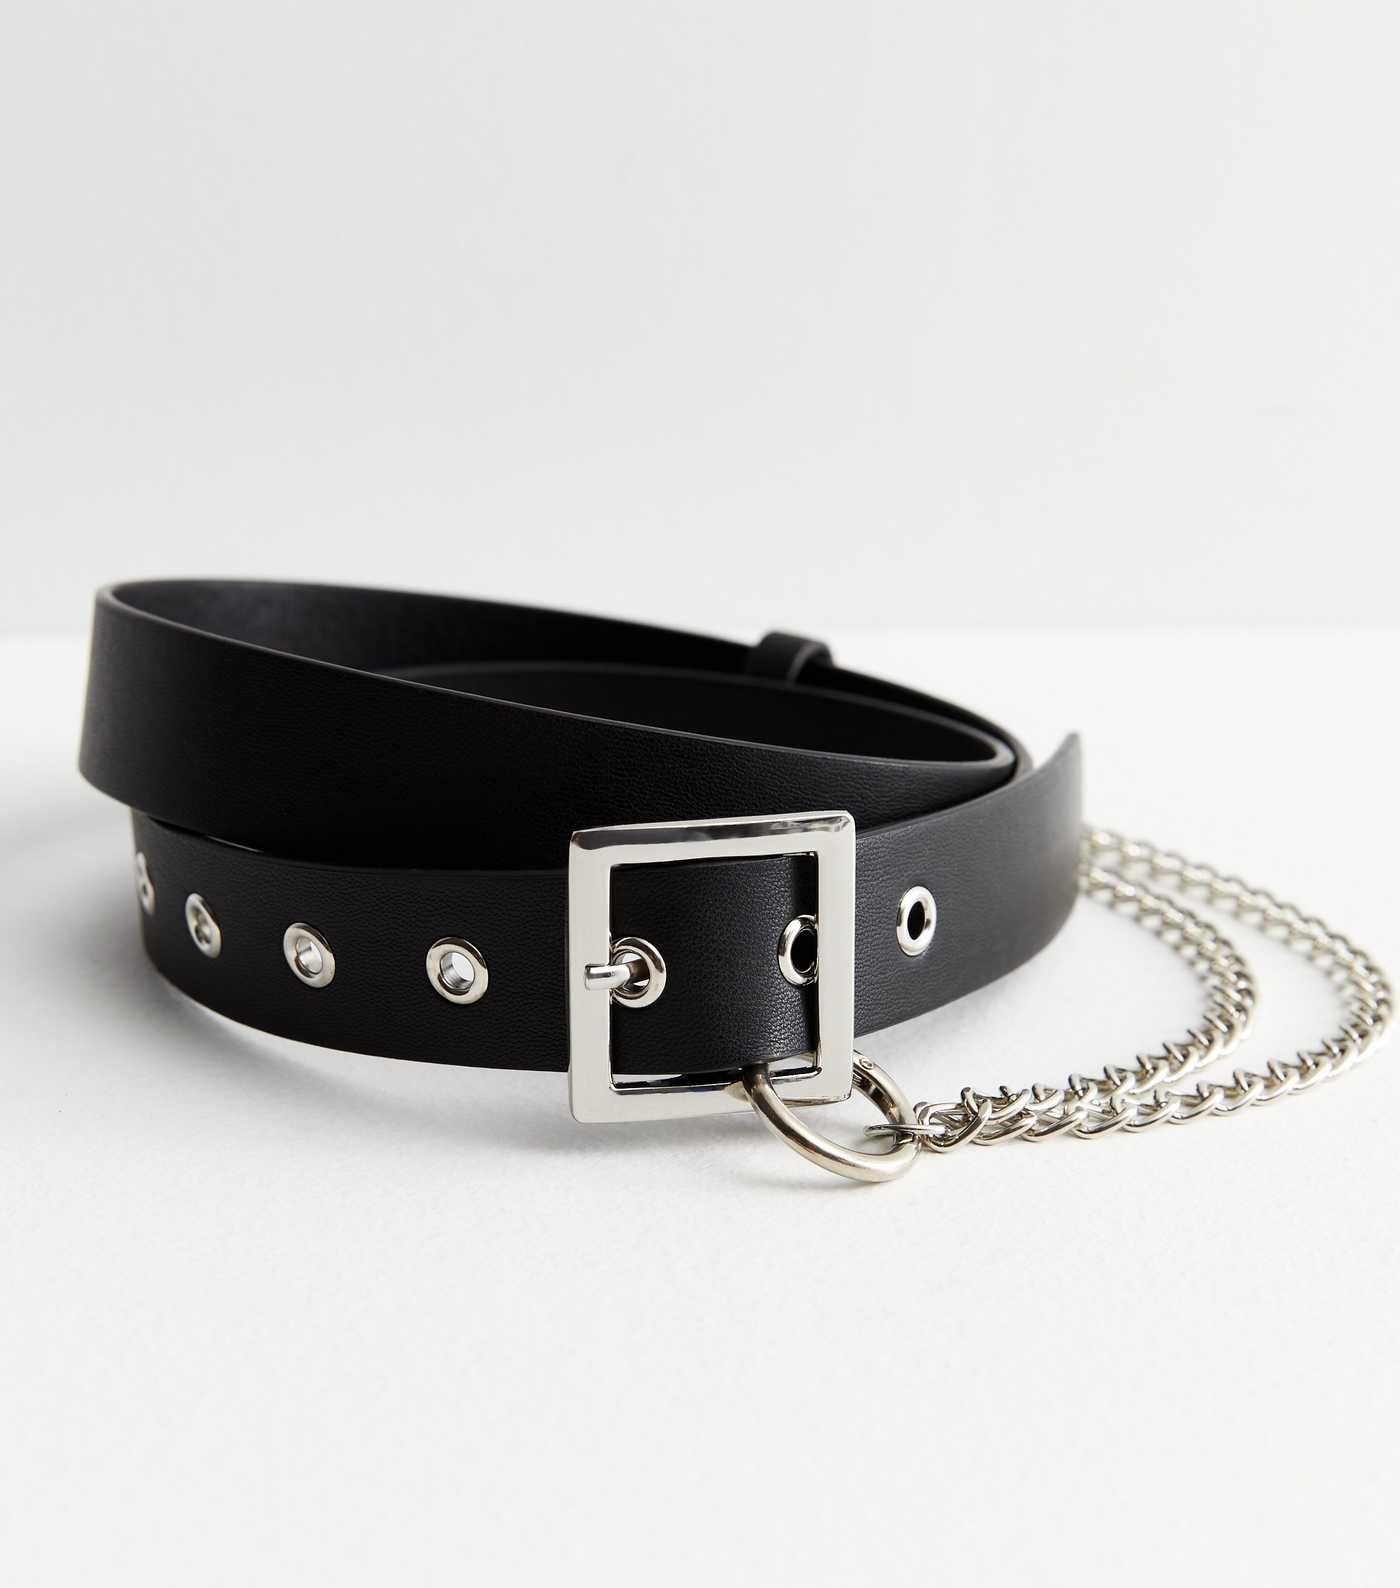 Black Eyelet Chain Belt
						
						Add to Saved Items
						Remove from Saved Items | New Look (UK)